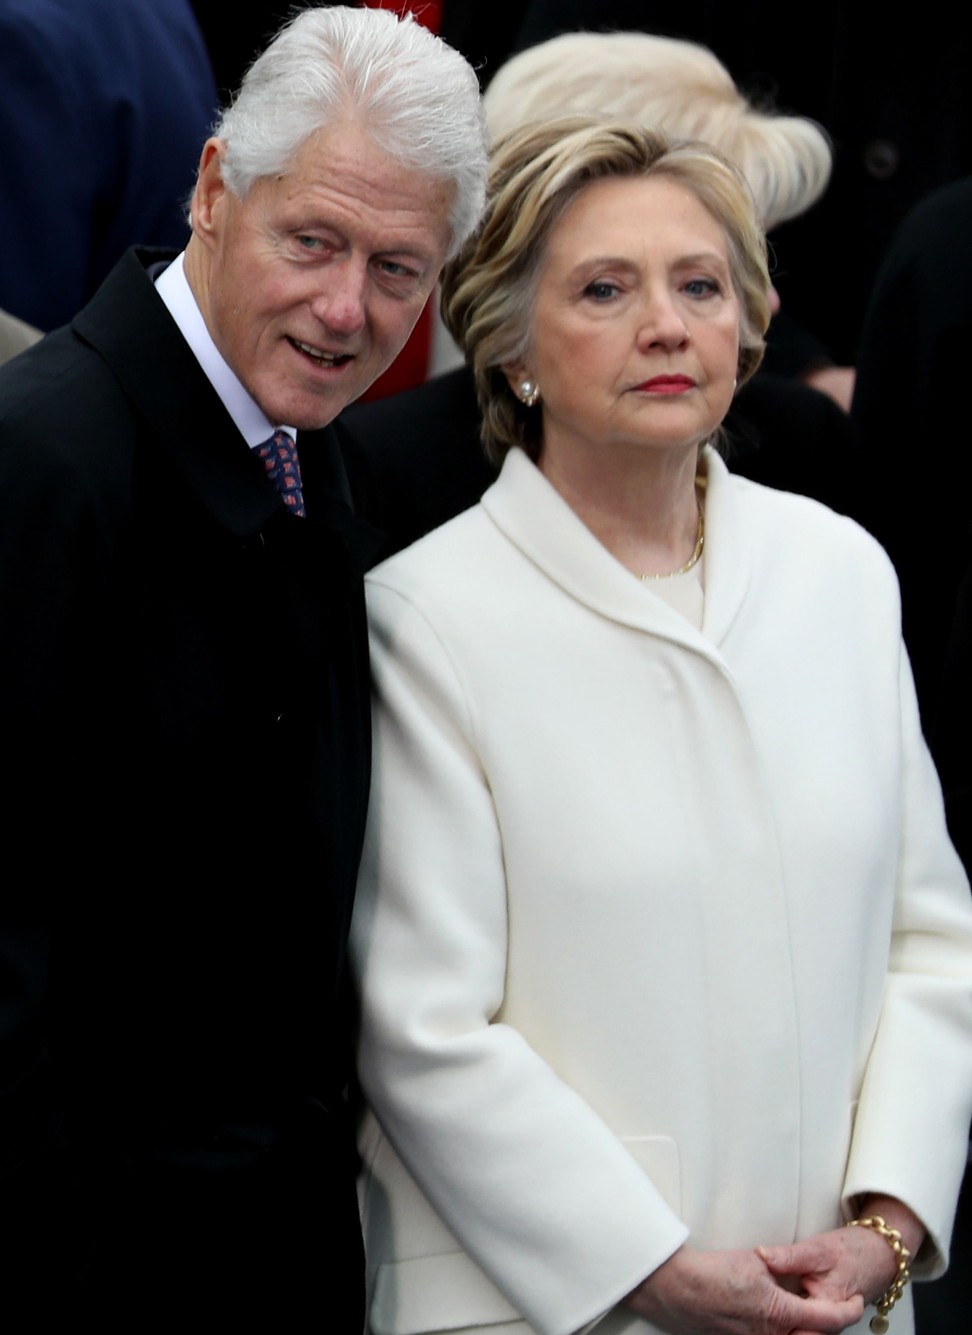 Hillary Clinton and former president Bill Clinton attend Donald Trump’s inauguration as 45th president of the United States. Photo: Getty Images/AFP